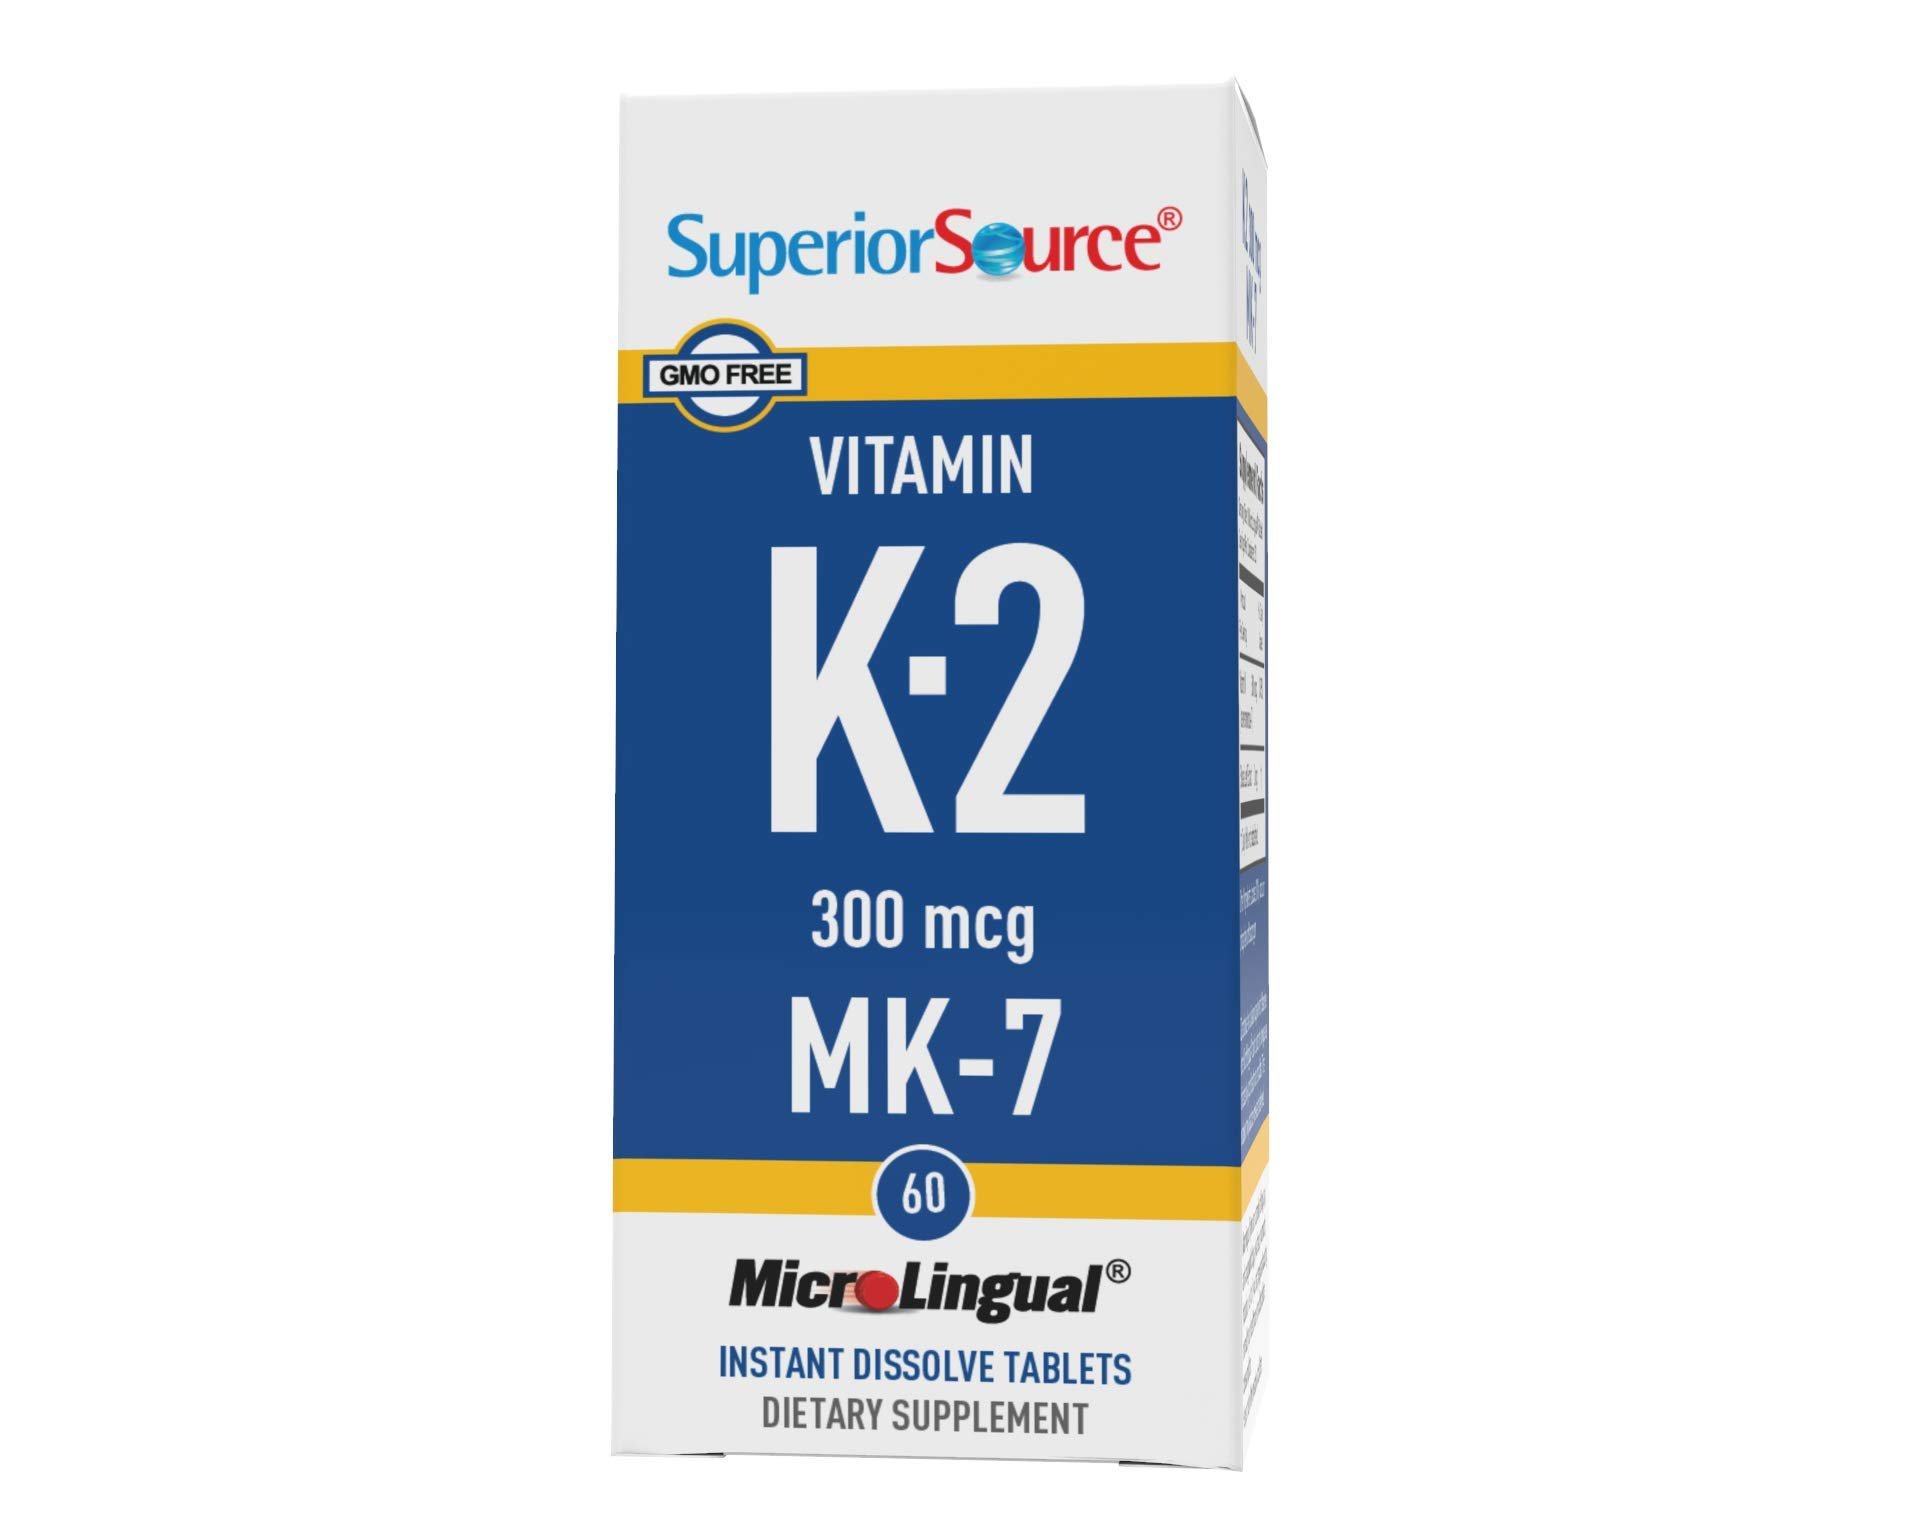 Superior Source Vitamin K2 MK-7 (Menaquinone-7), 300 mcg, Quick Dissolve Sublingual Tablets, 60 Count, Healthy Bones and Arteries, Immune & Cardiovascular Support, Assists Protein Synthesis, Non-GMO